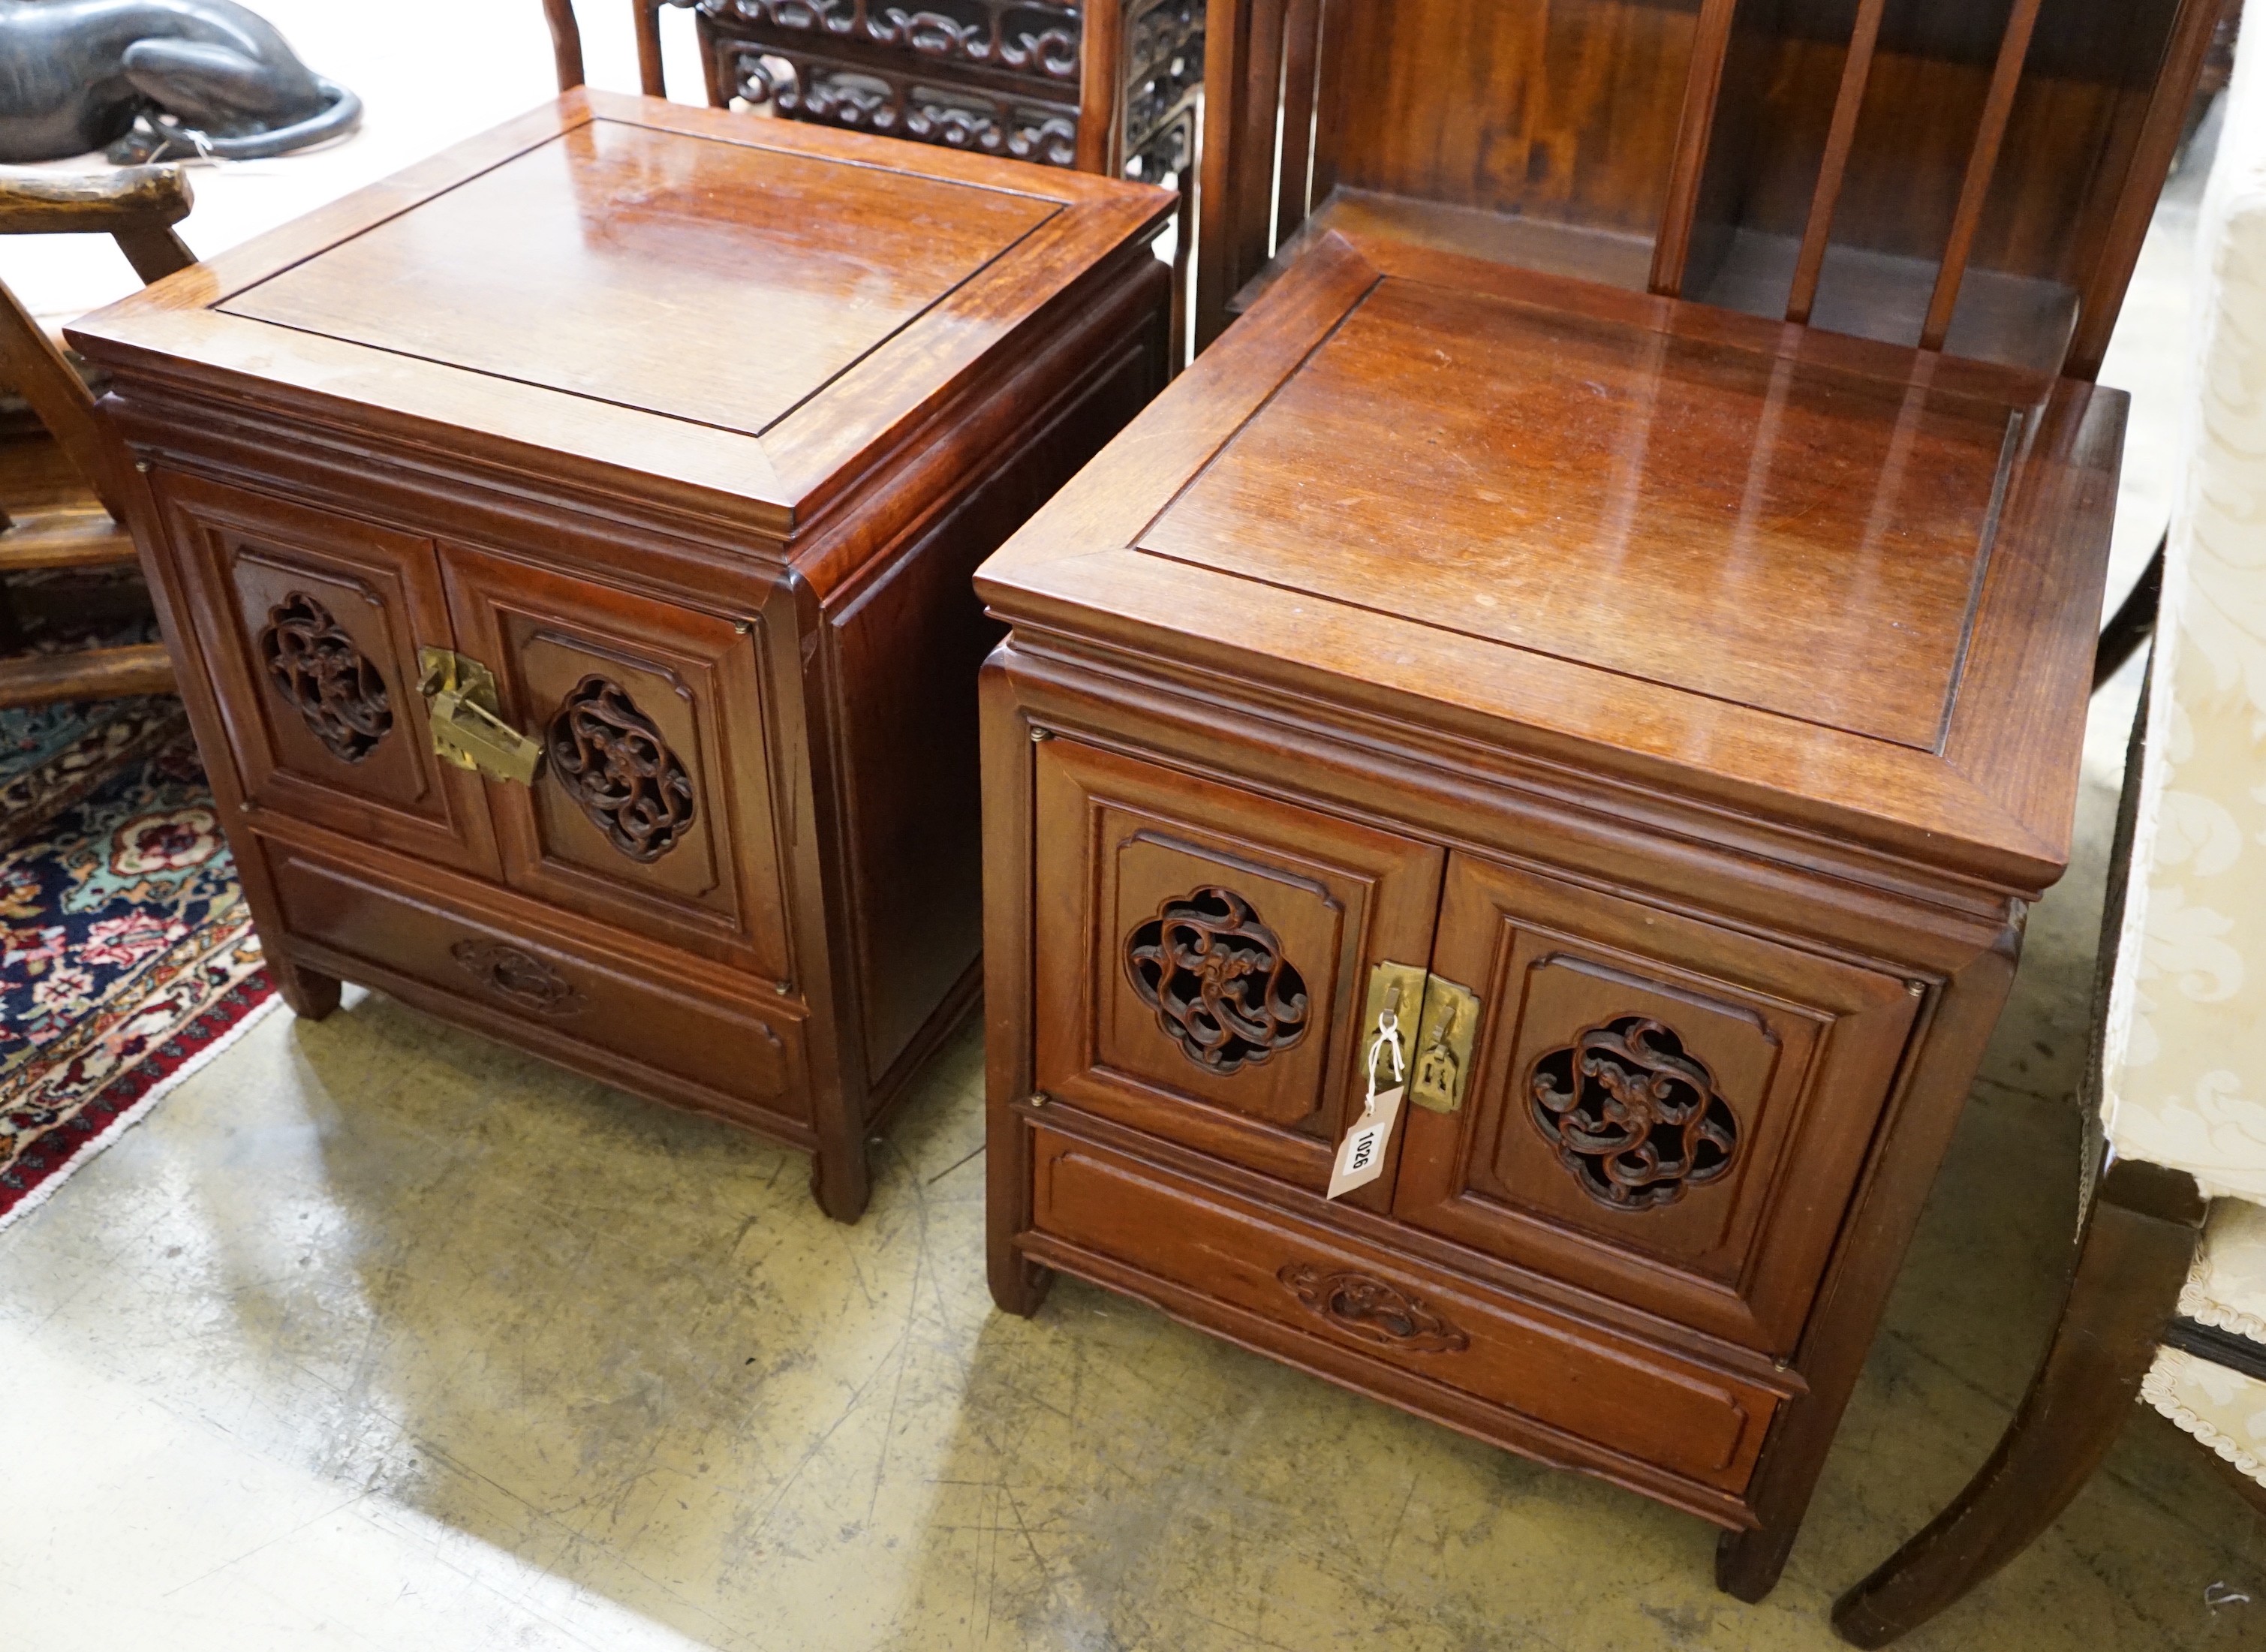 A pair of Chinese carved padouk bedside cabinets, width 51cm, depth 51cm, height 56cm